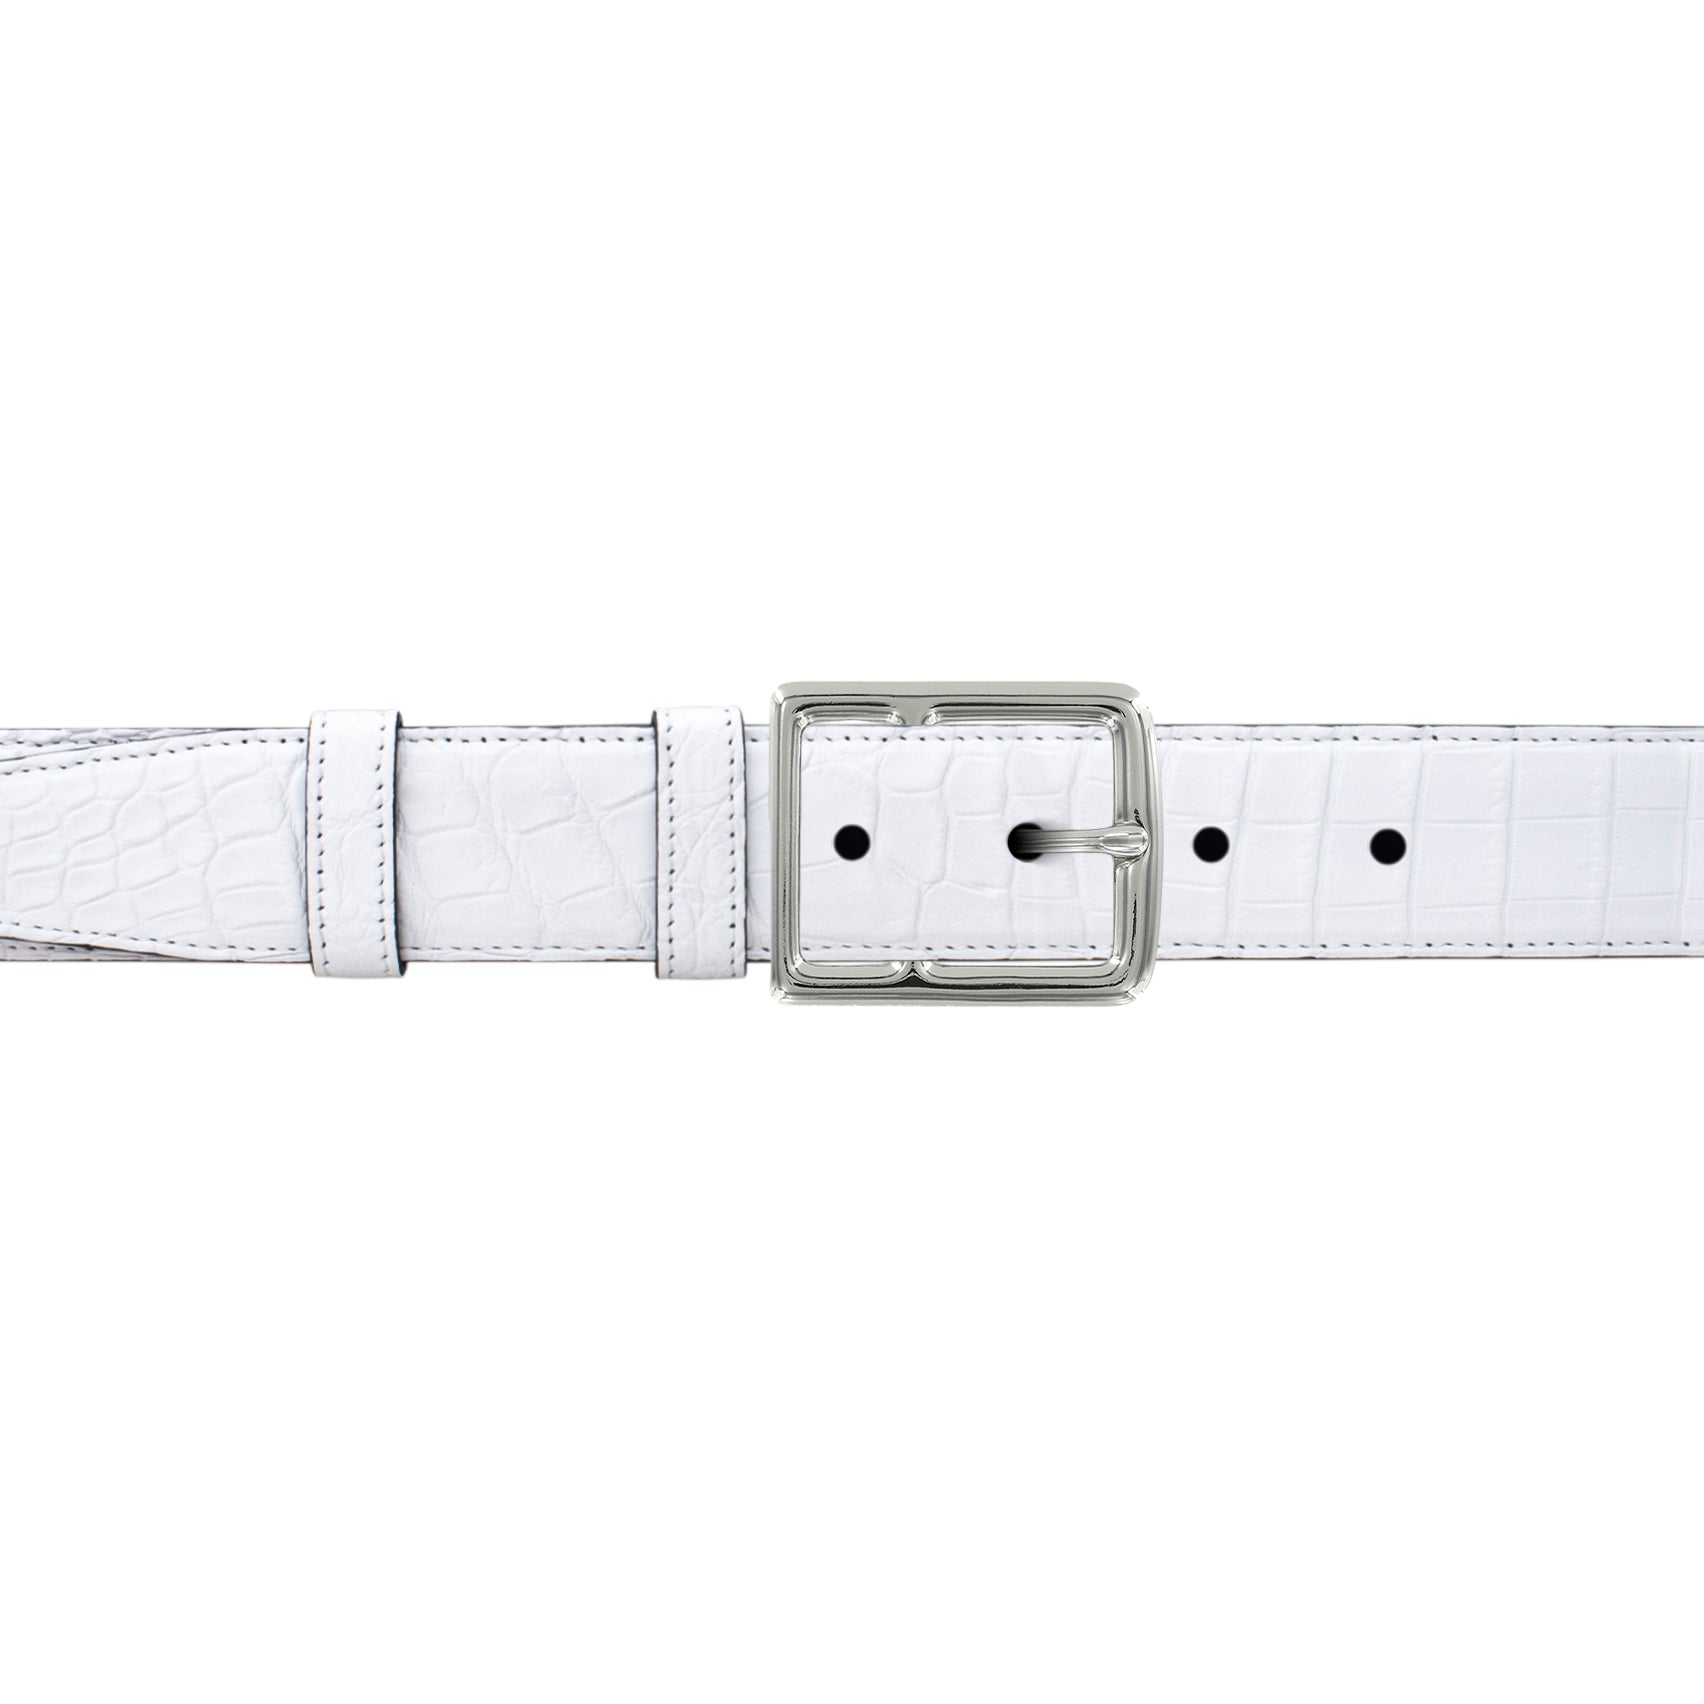 1 1/4" White Classic Belt with Crawford Casual Buckle in Polished Nickel